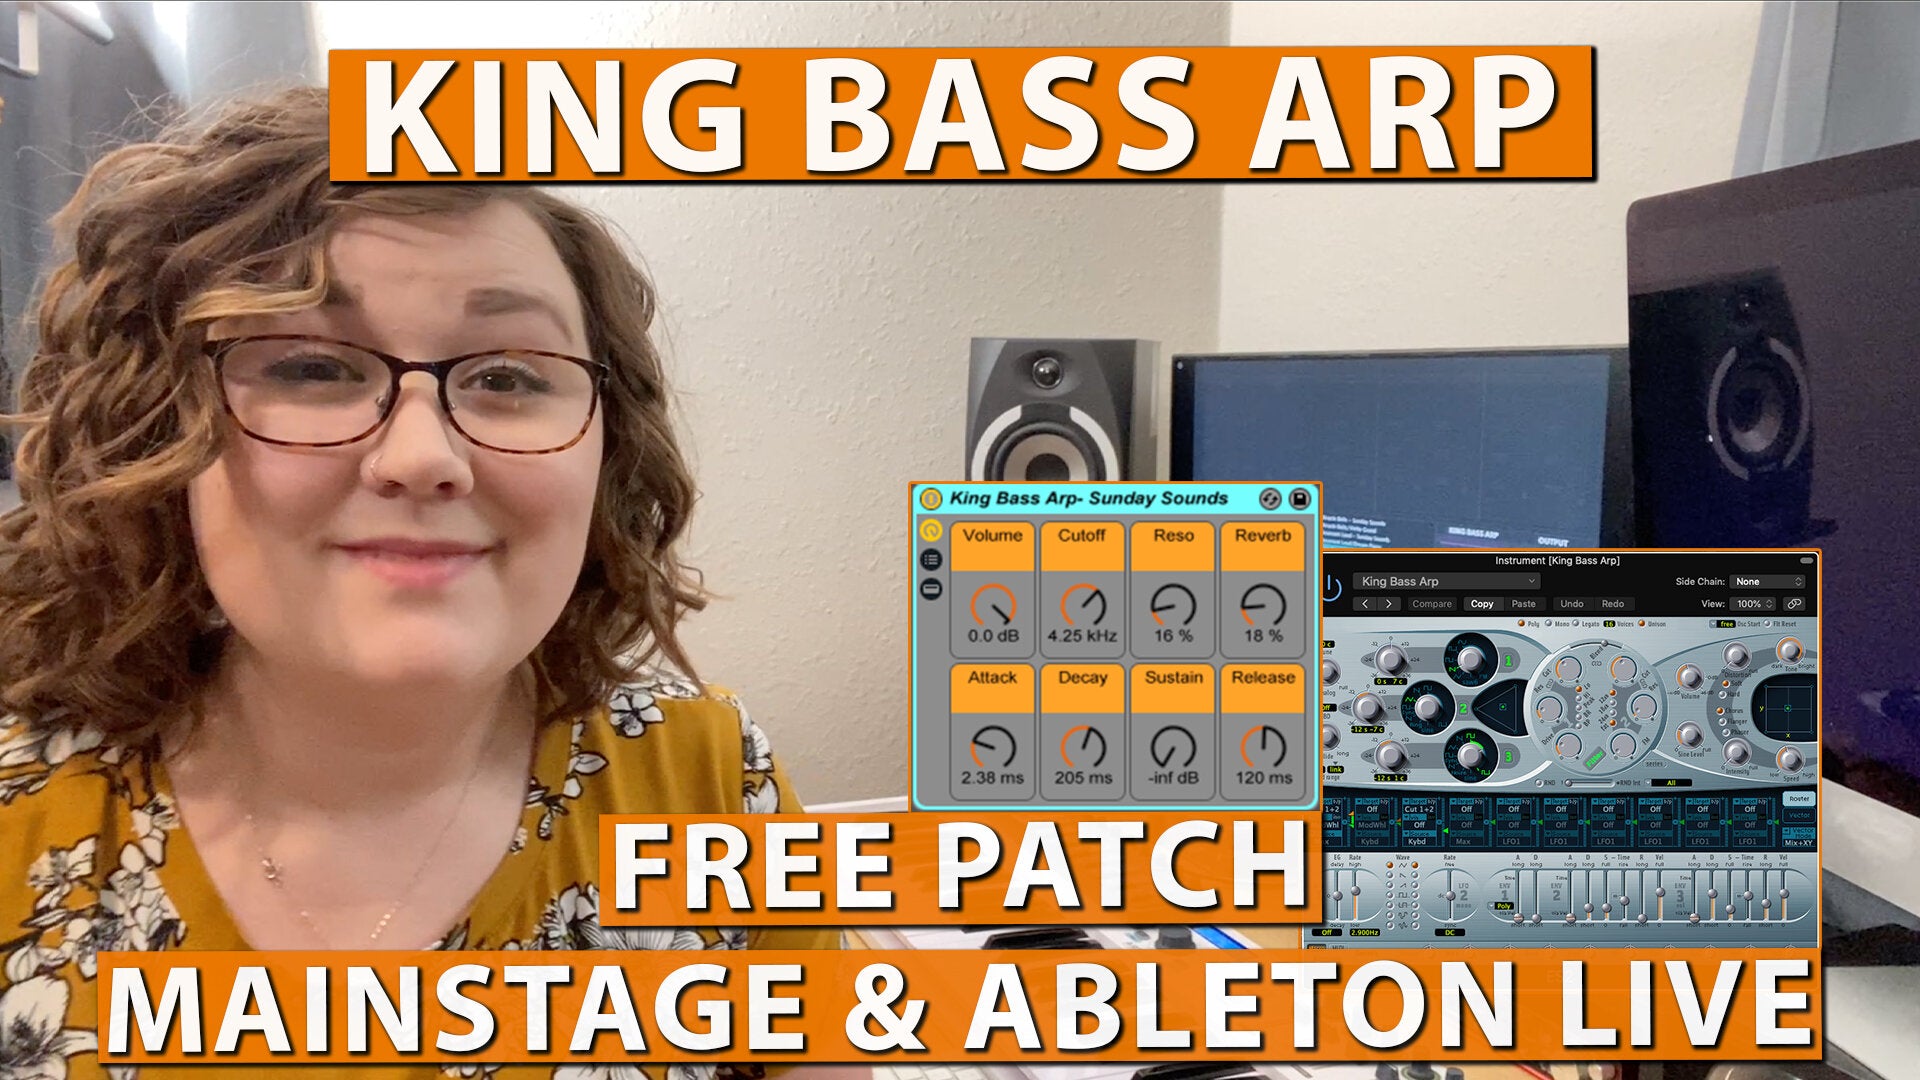 Free MainStage & Ableton Worship Patch! - King Bass Arp